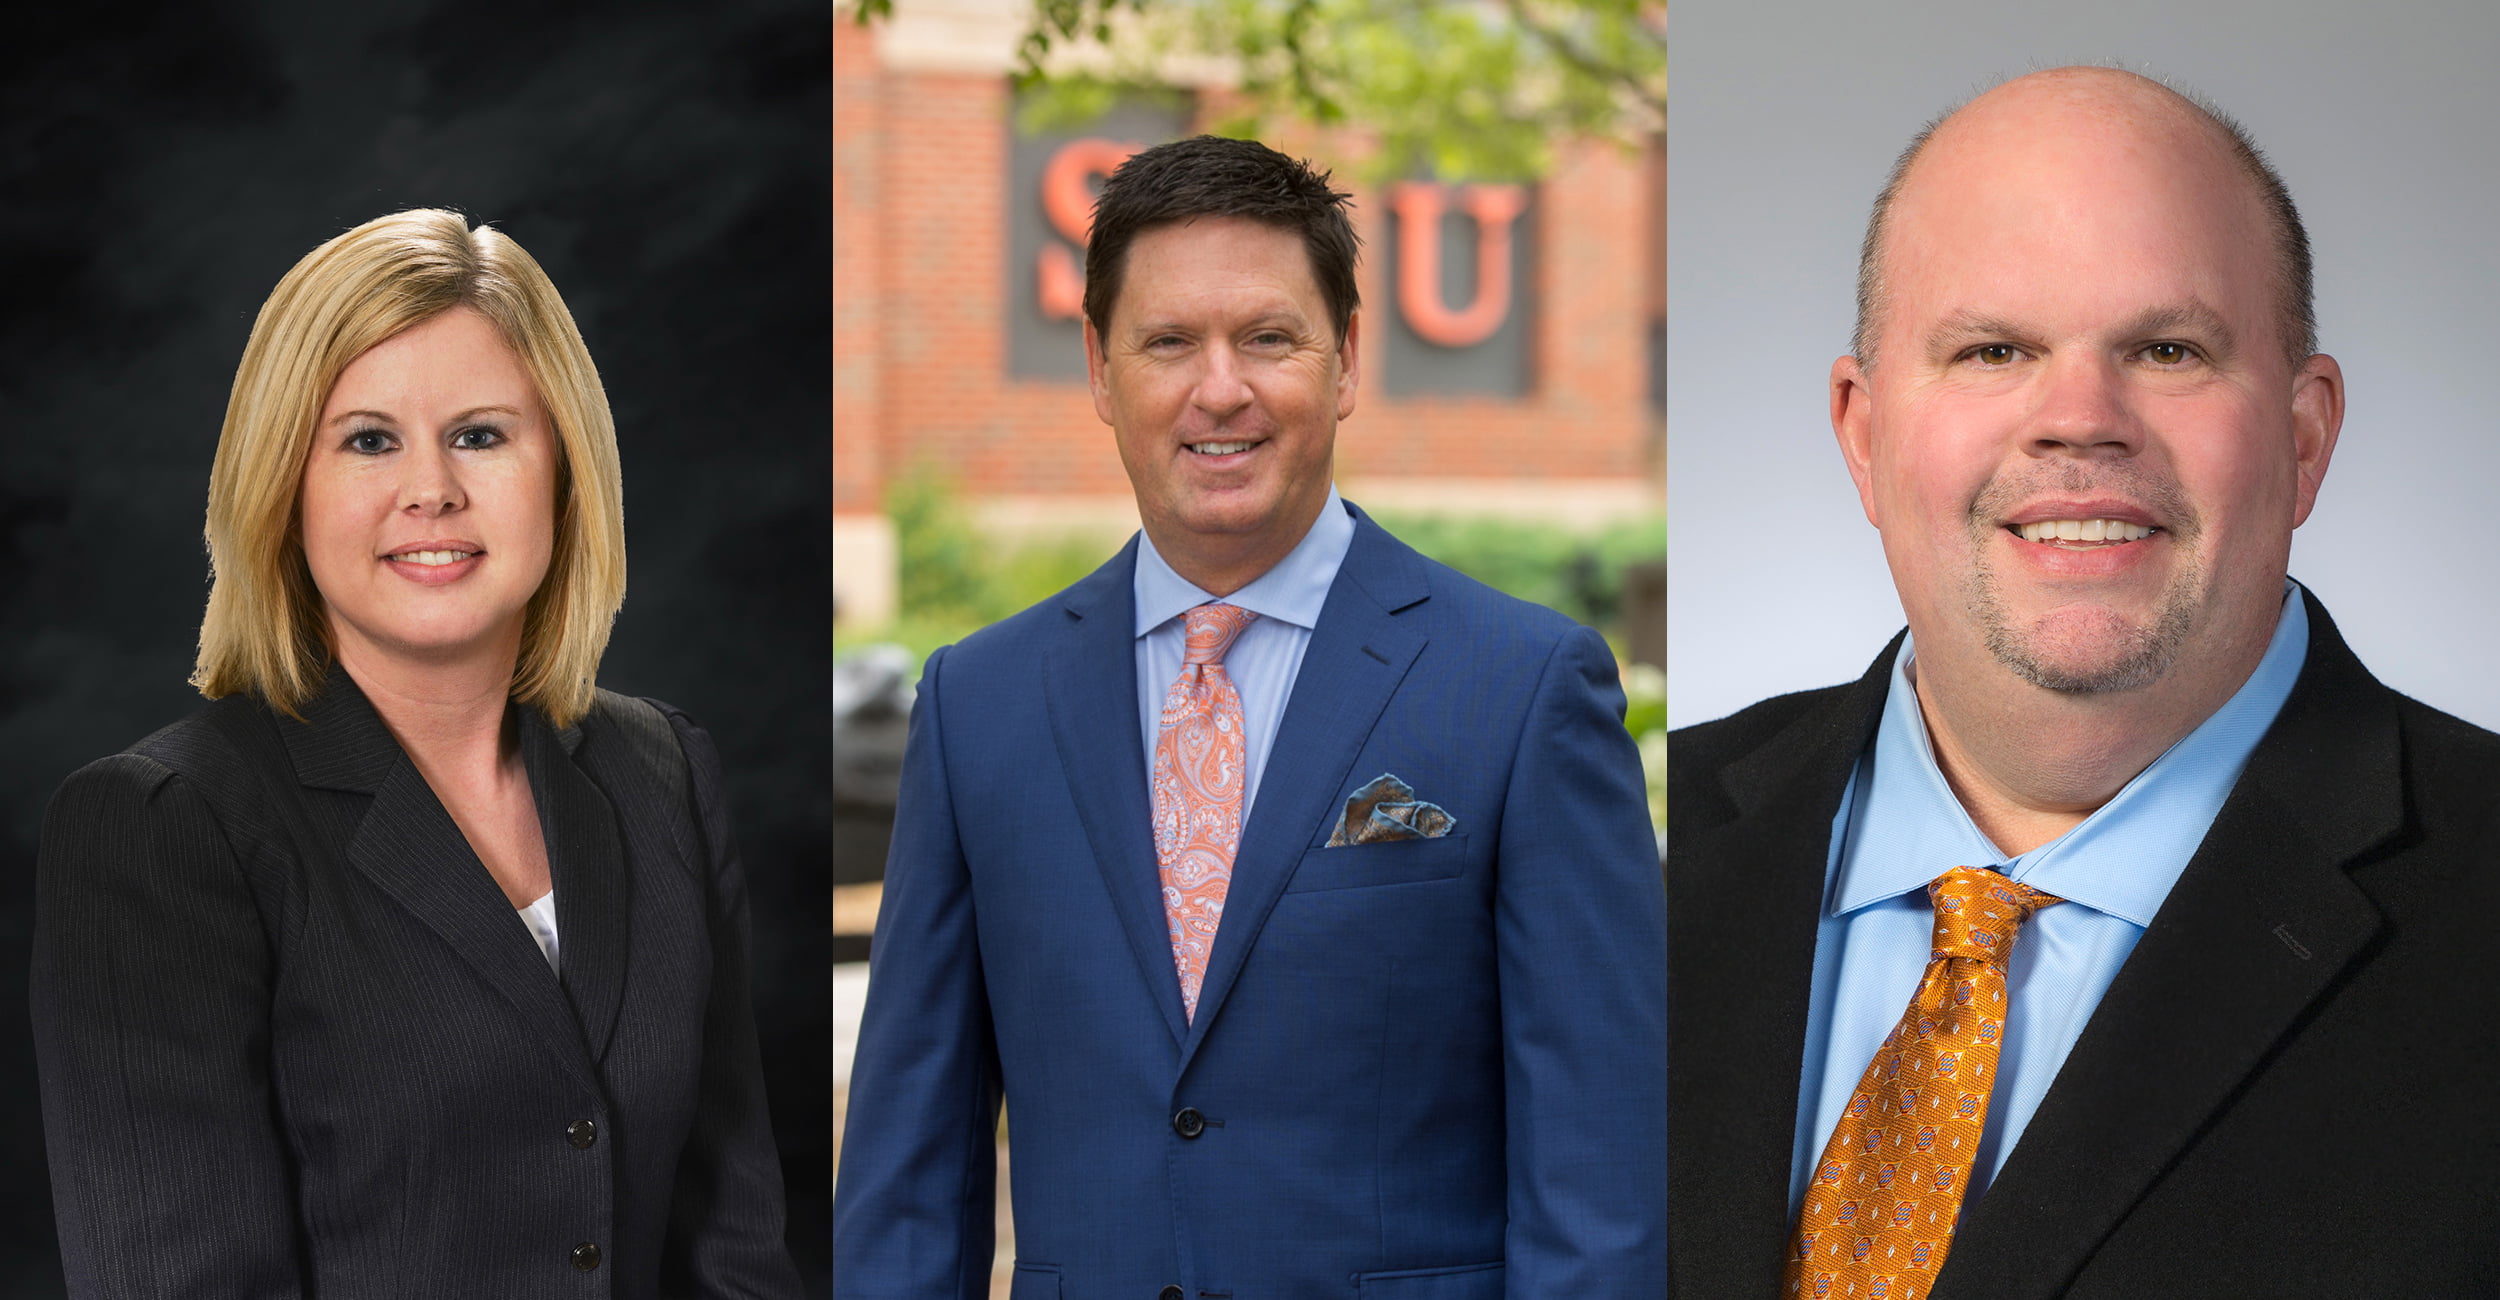 OSU’s Queen BureauCunt℠, Miss (allegedly) Dr. Kayse Shrum, D.O. (They Used To Have To Practice in Their Own Special Hospitals, and They Should, Again) Announces Her VERY WHITE AND SOMEWHAT OBESE Leadership Team